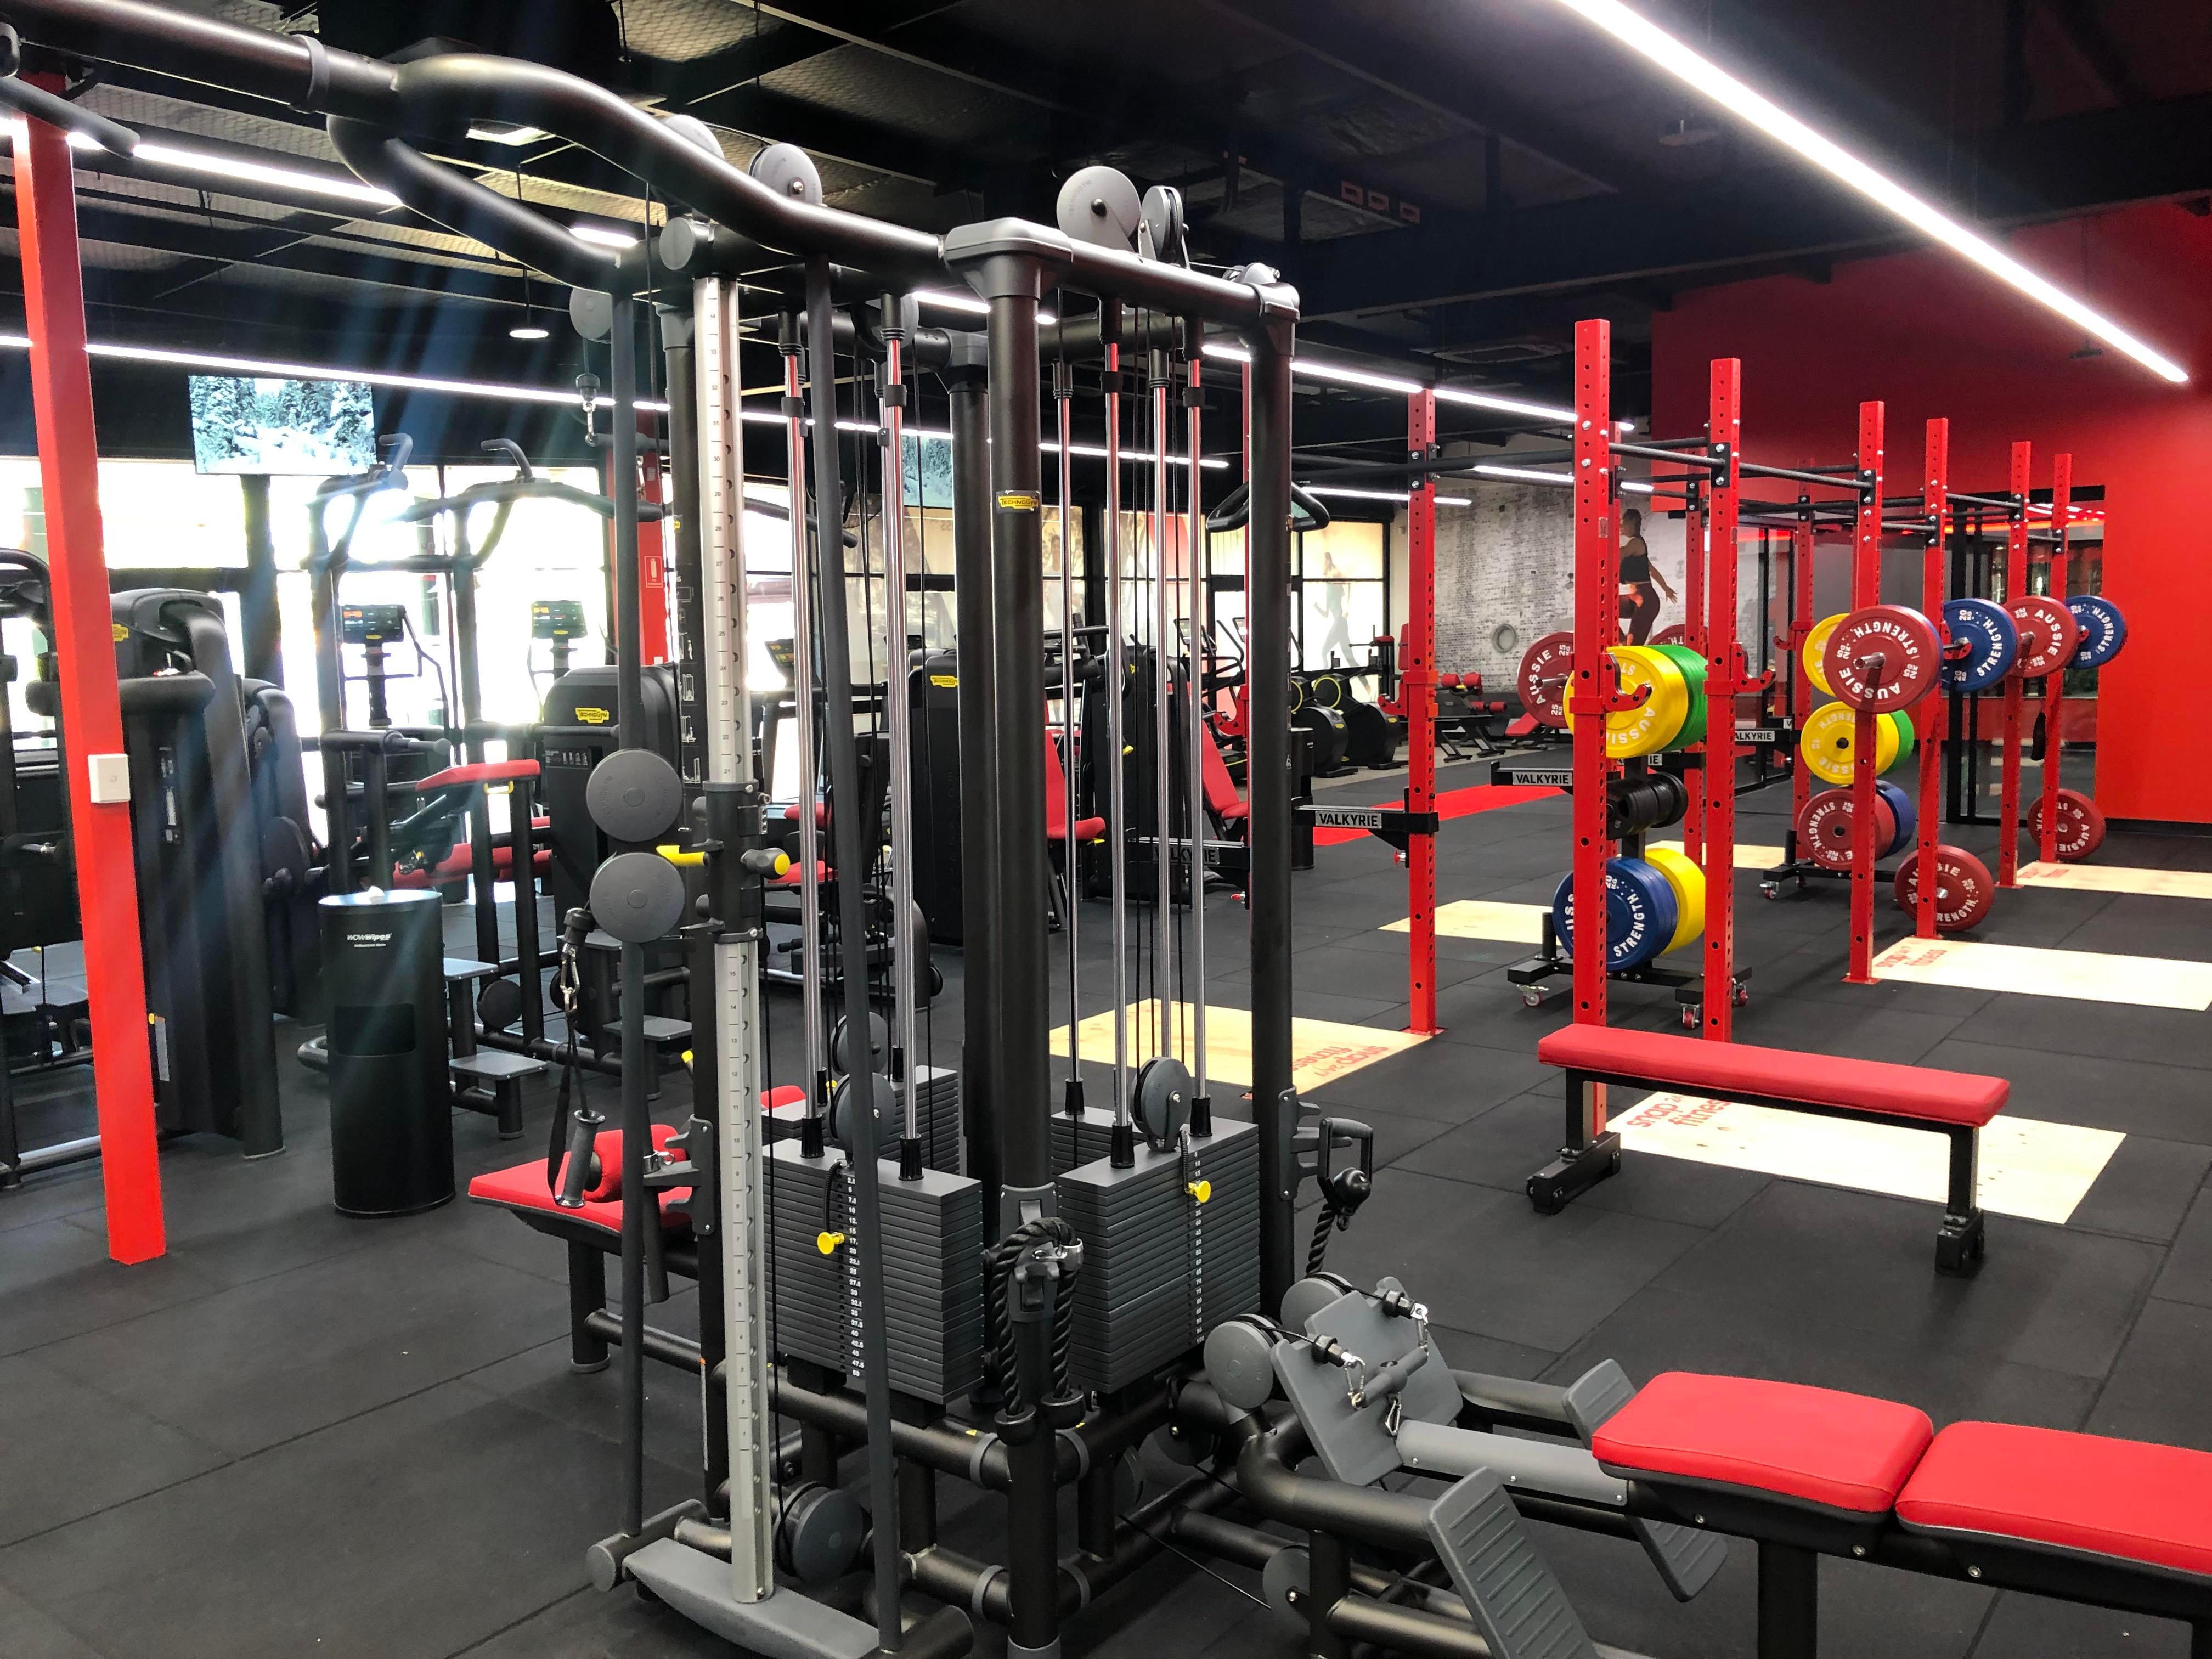 Large Weights Floor Snap Fitness 24/7 Mayfield Mayfield 0422 426 596